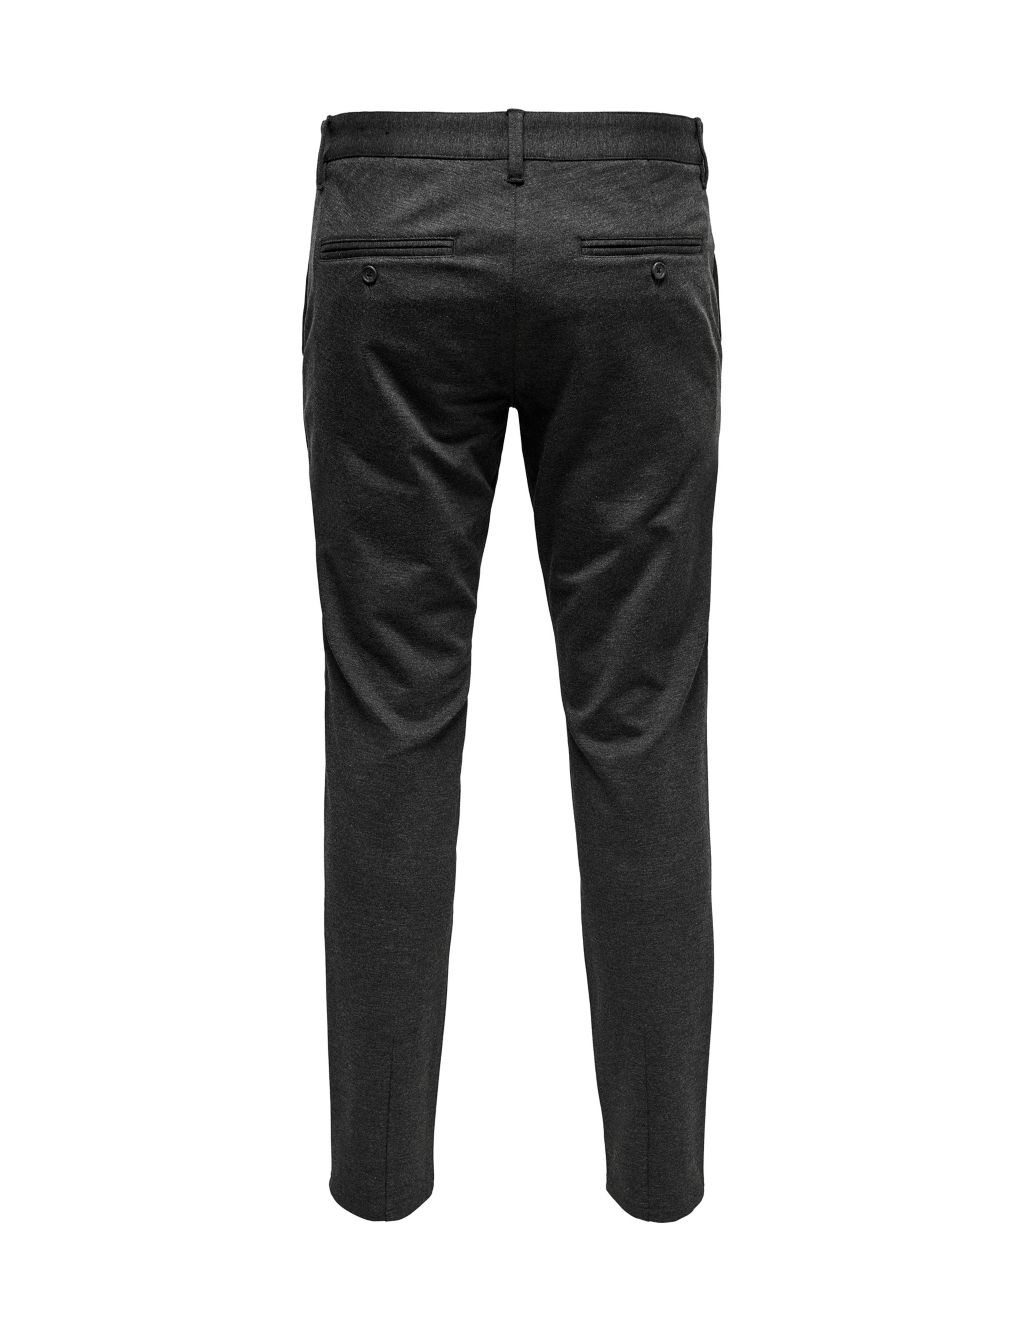 Tapered Fit Flat Front Trousers image 6